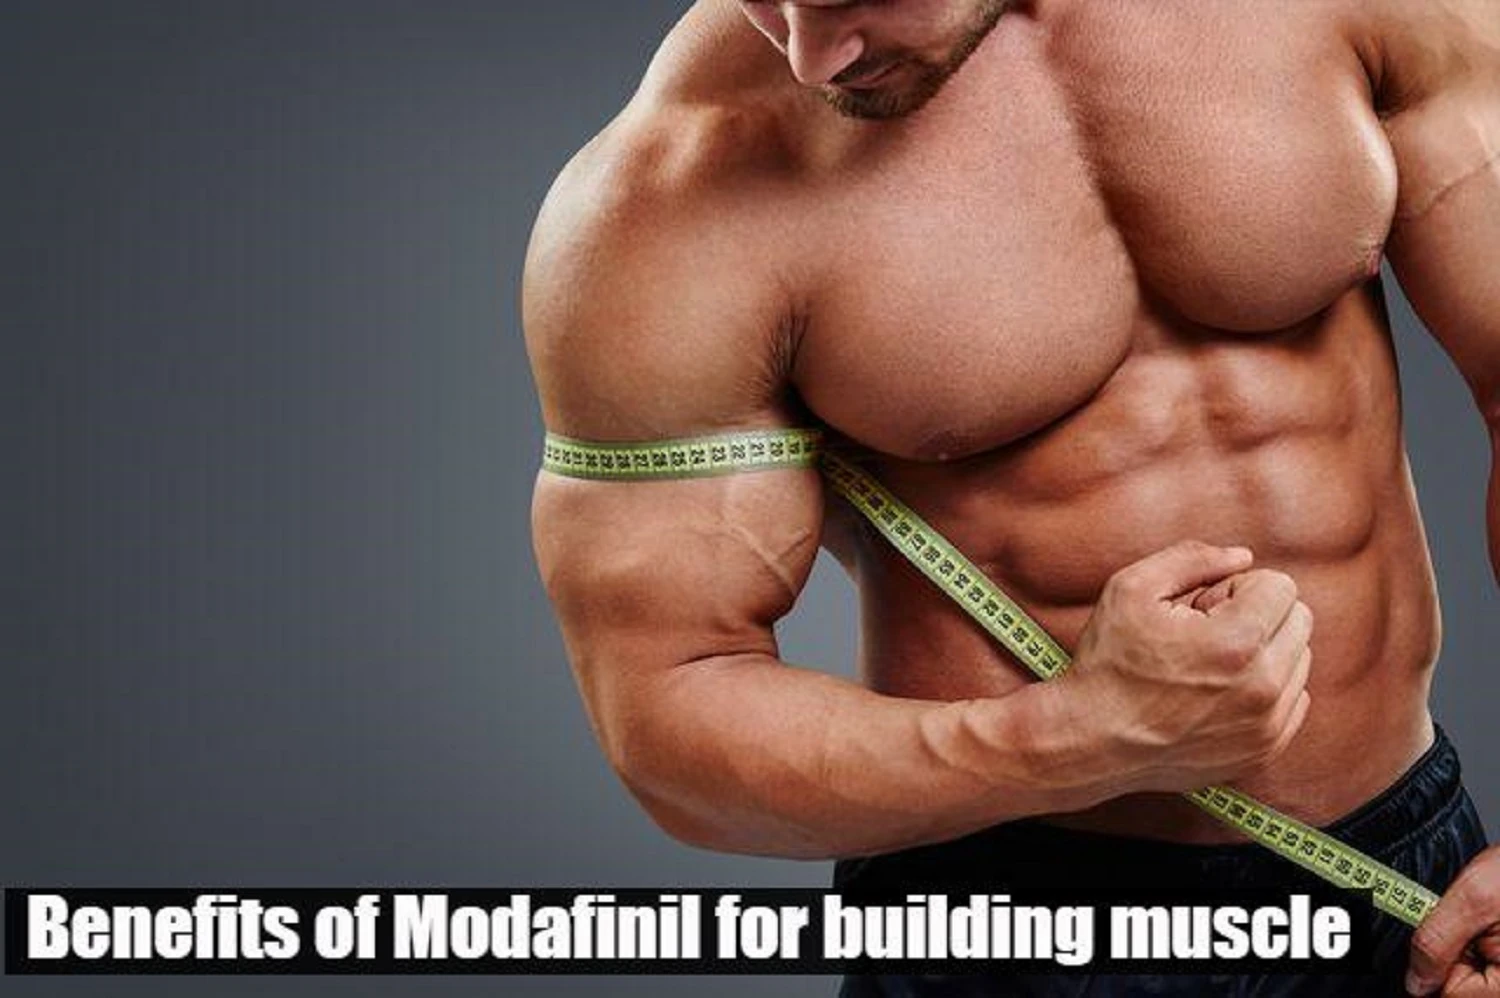 Modafinil benefits for building muscle